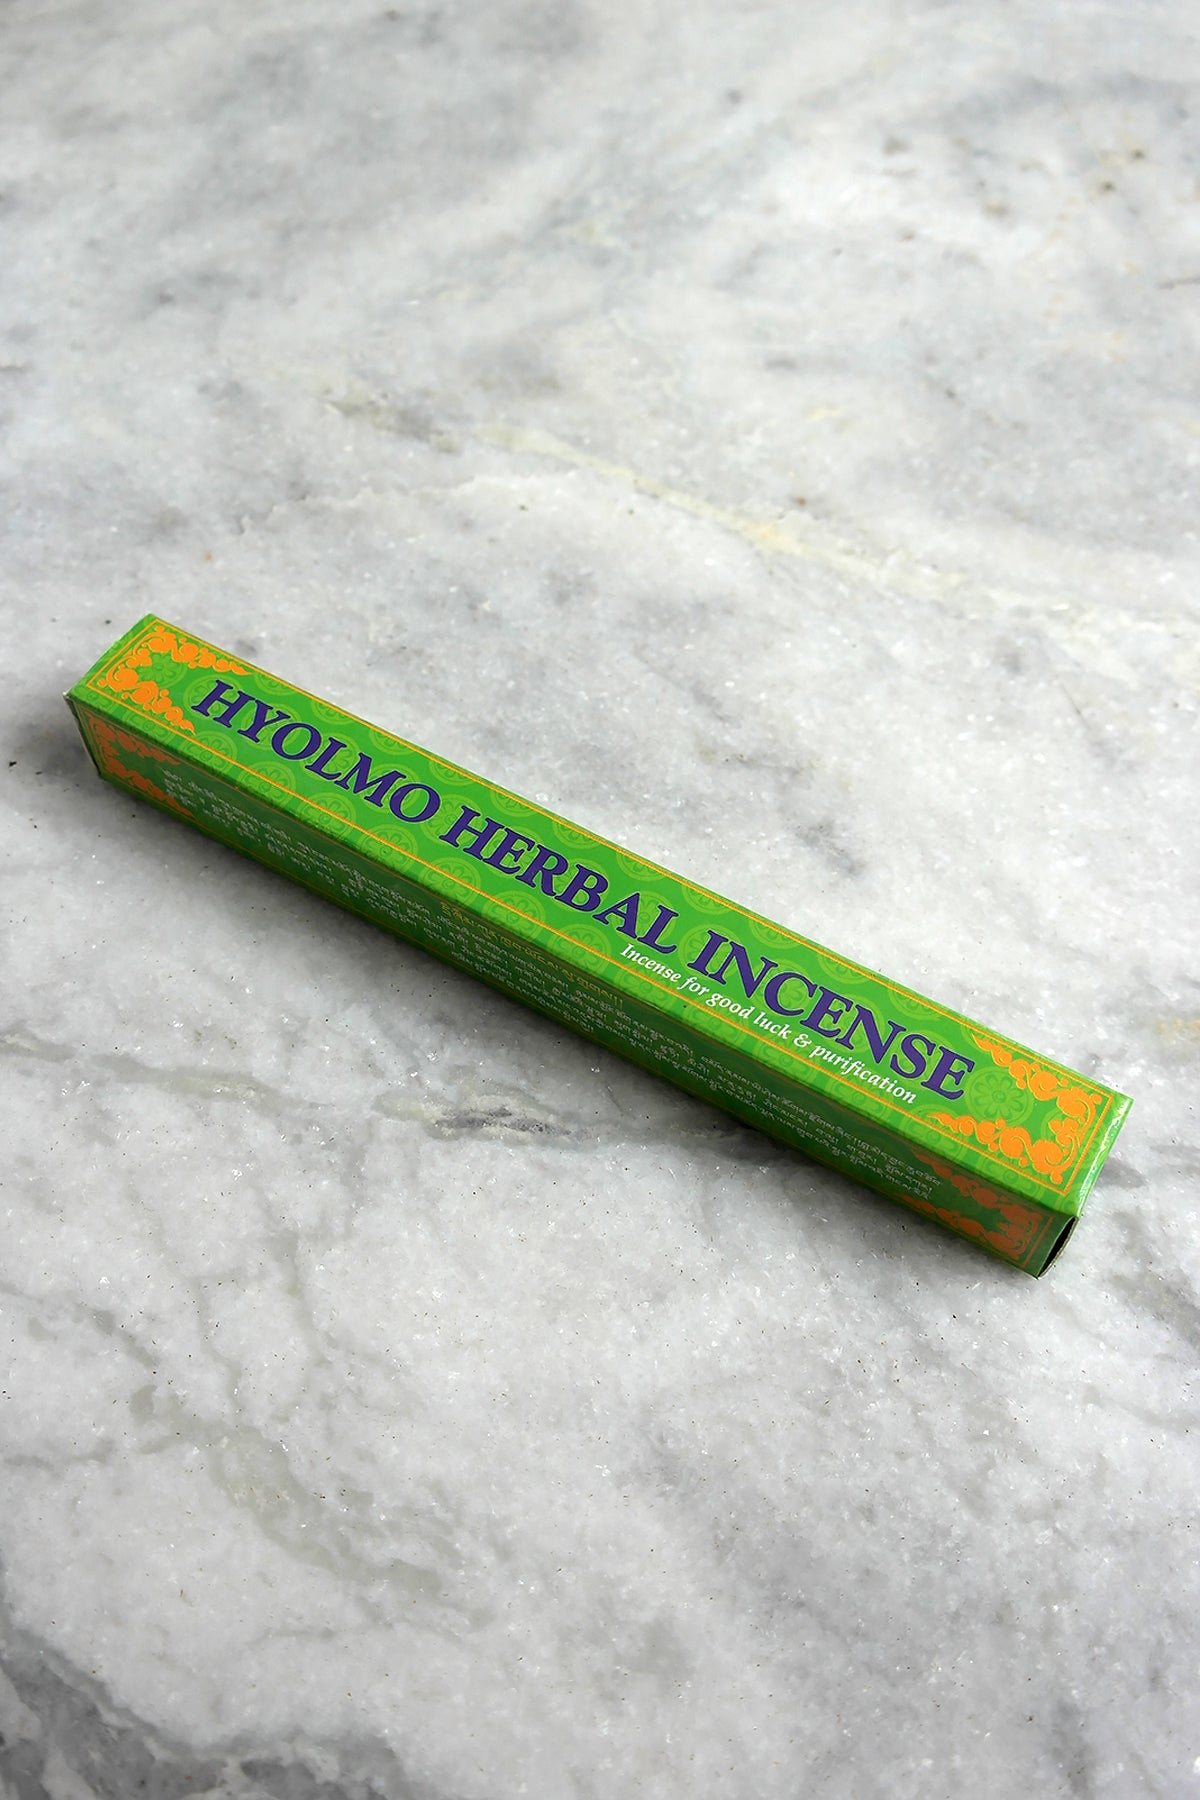 Hyolmo Herbal Incense Sticks- incense for good luck and purification